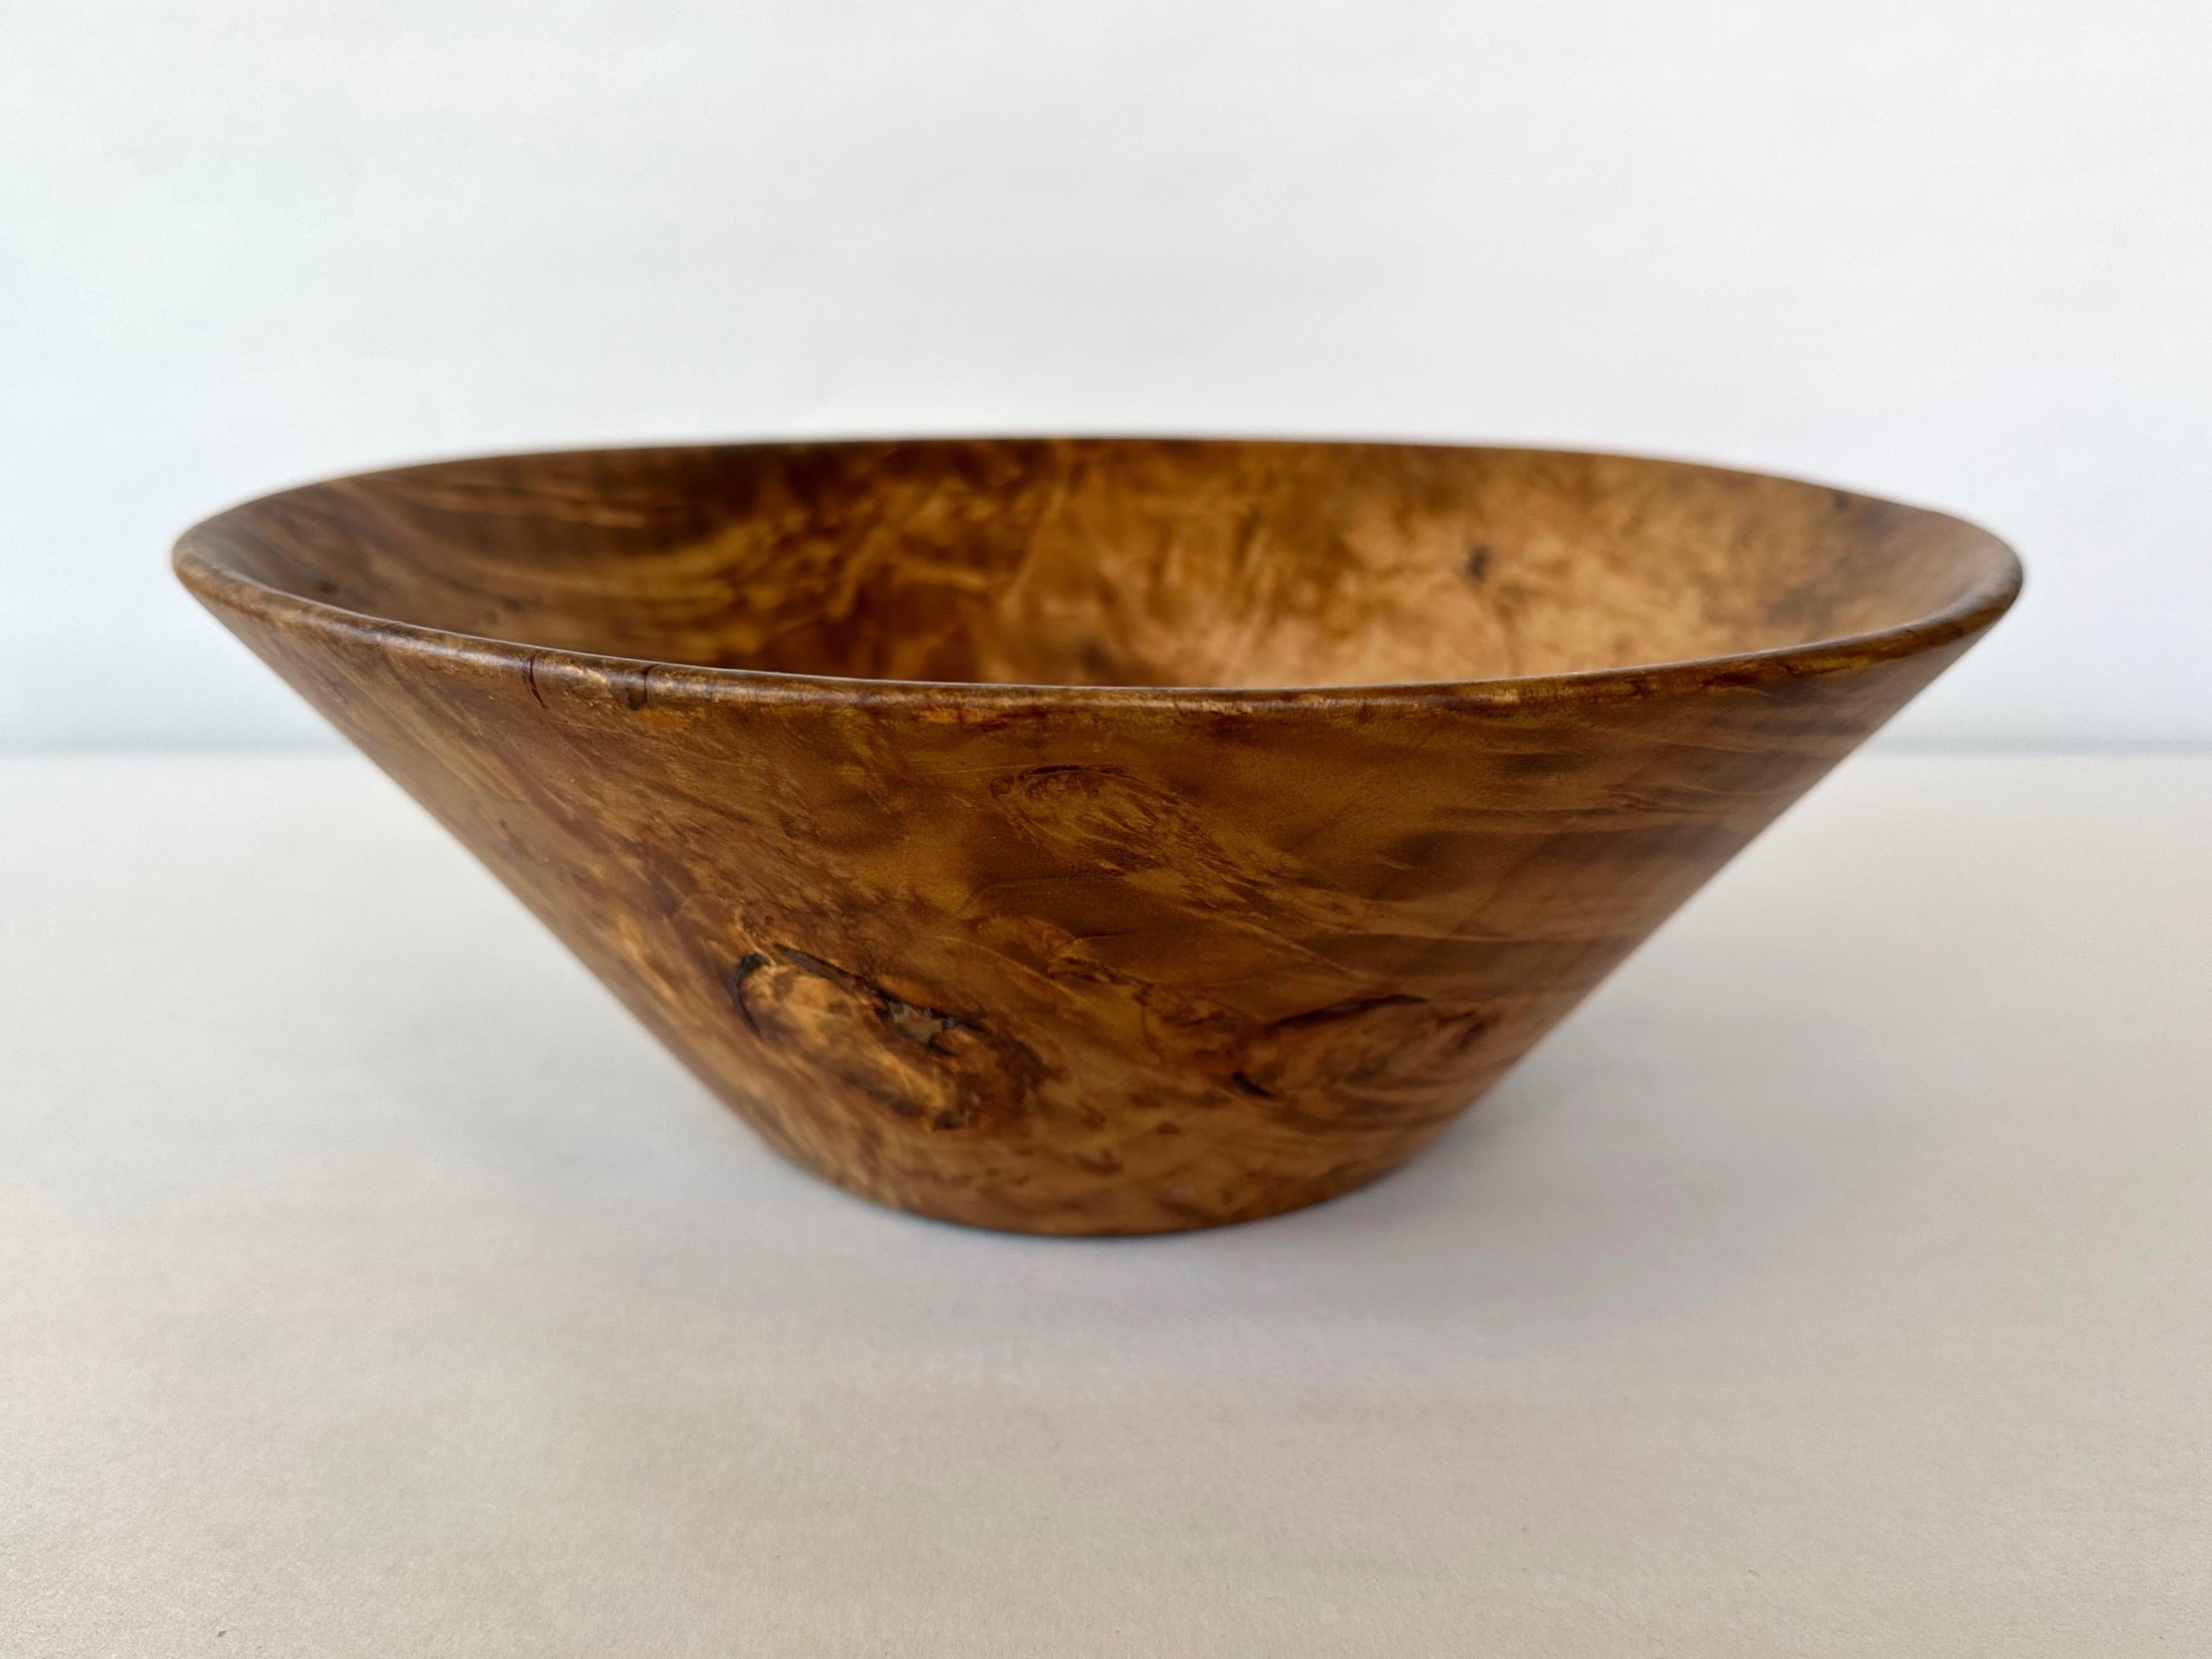 A beautiful 1979 bay laurel burl turned wood bowl by notable Marin County, California wood sculptor Bruce Mitchell.

An early work by Mitchell featuring fantastic flame-like figuring throughout. Of particular interest are a pair of slightly raised